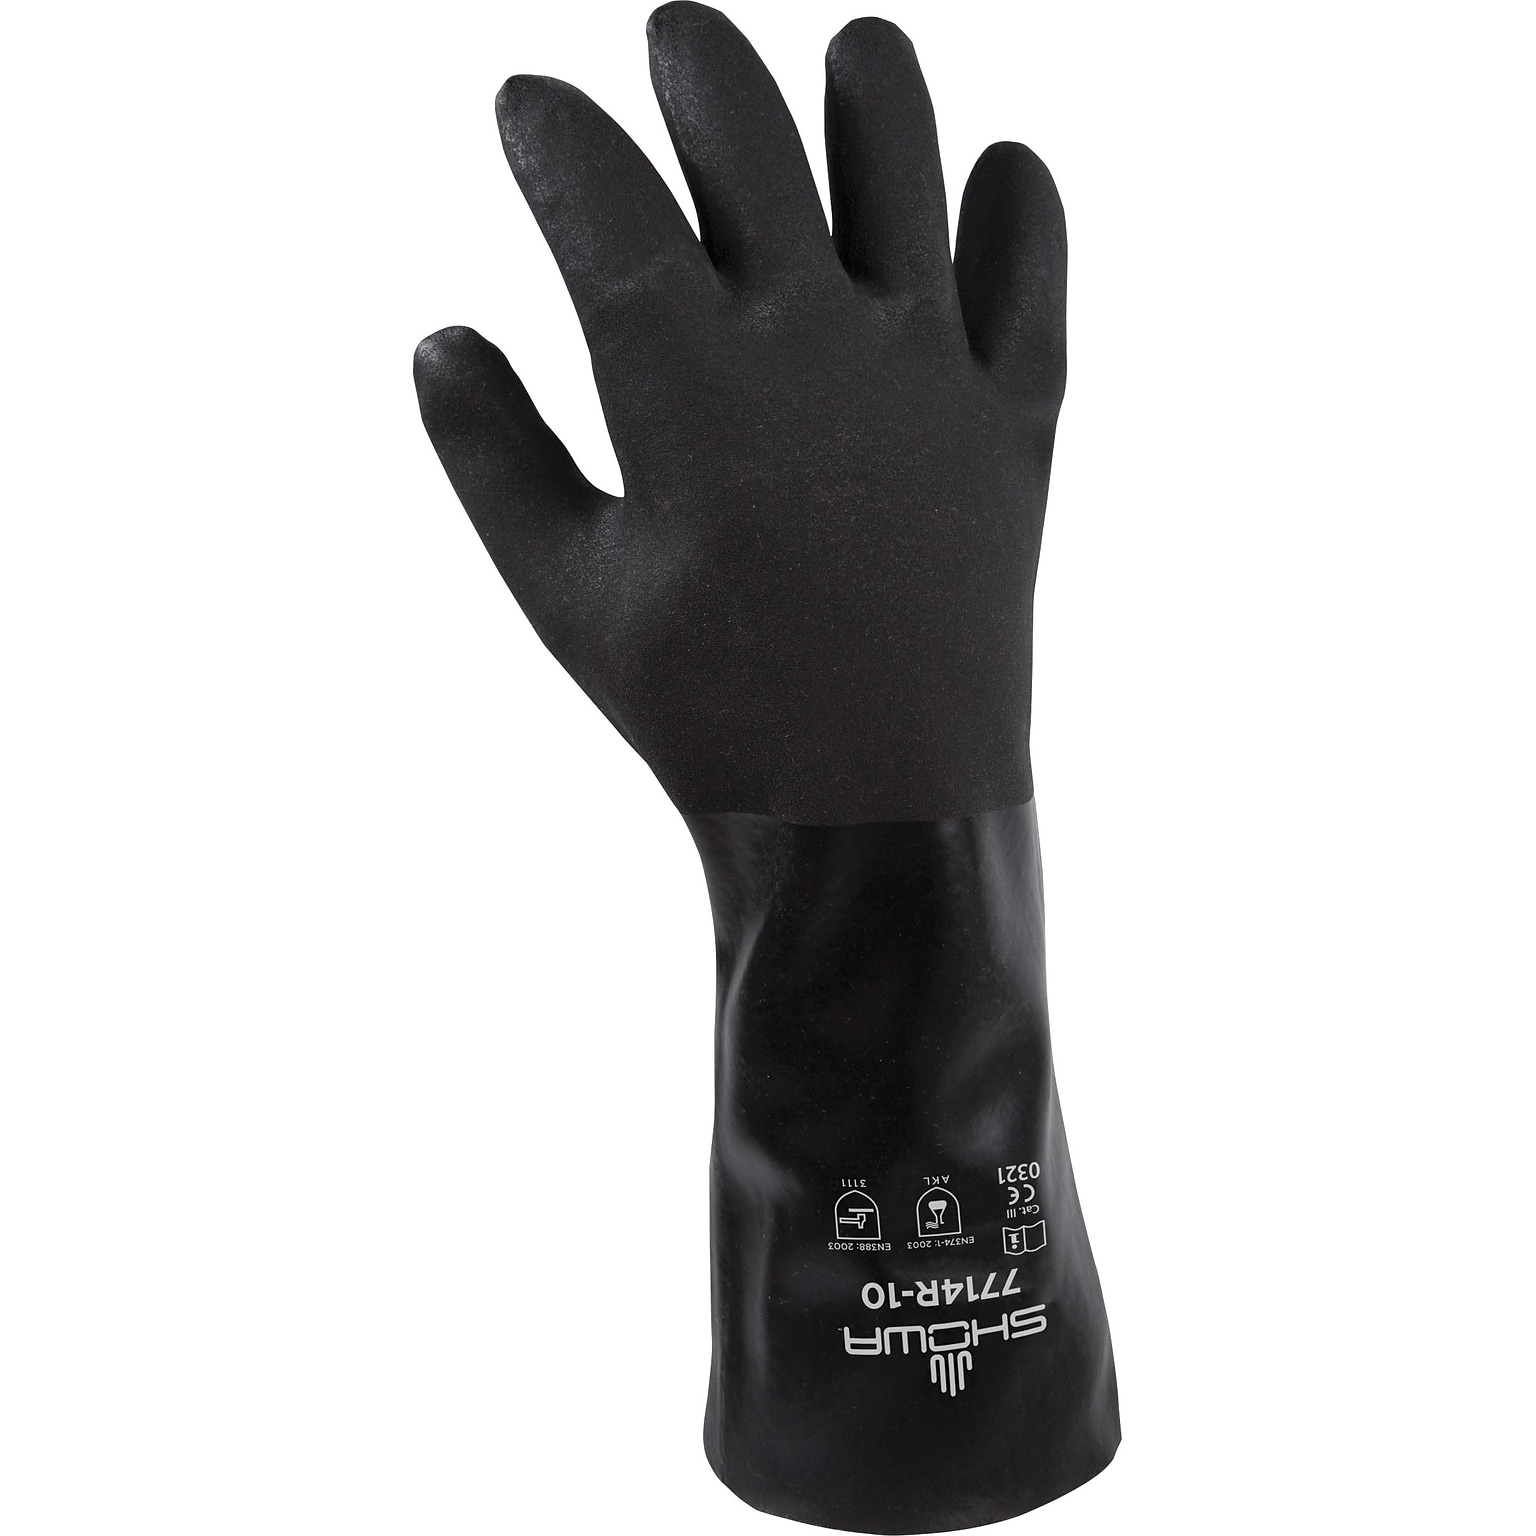 Showa Best Manufacturing Company Chemical Resistant Gloves, Black, Large, 12/Pack (384102945)